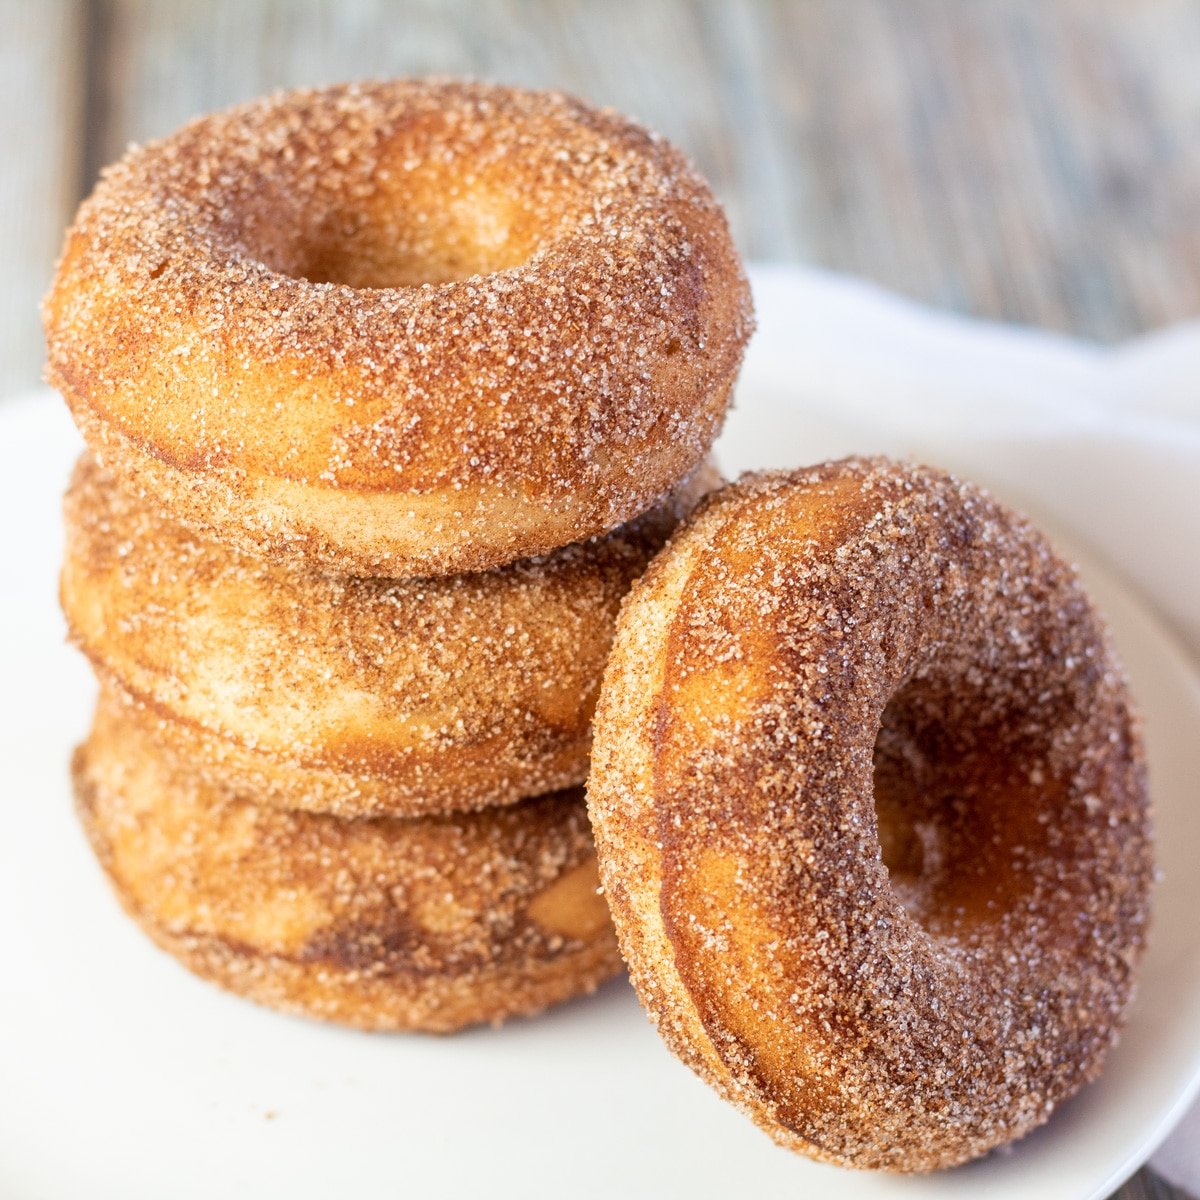 Square image of cinnamon sugar baked donuts stacked on a white plate.